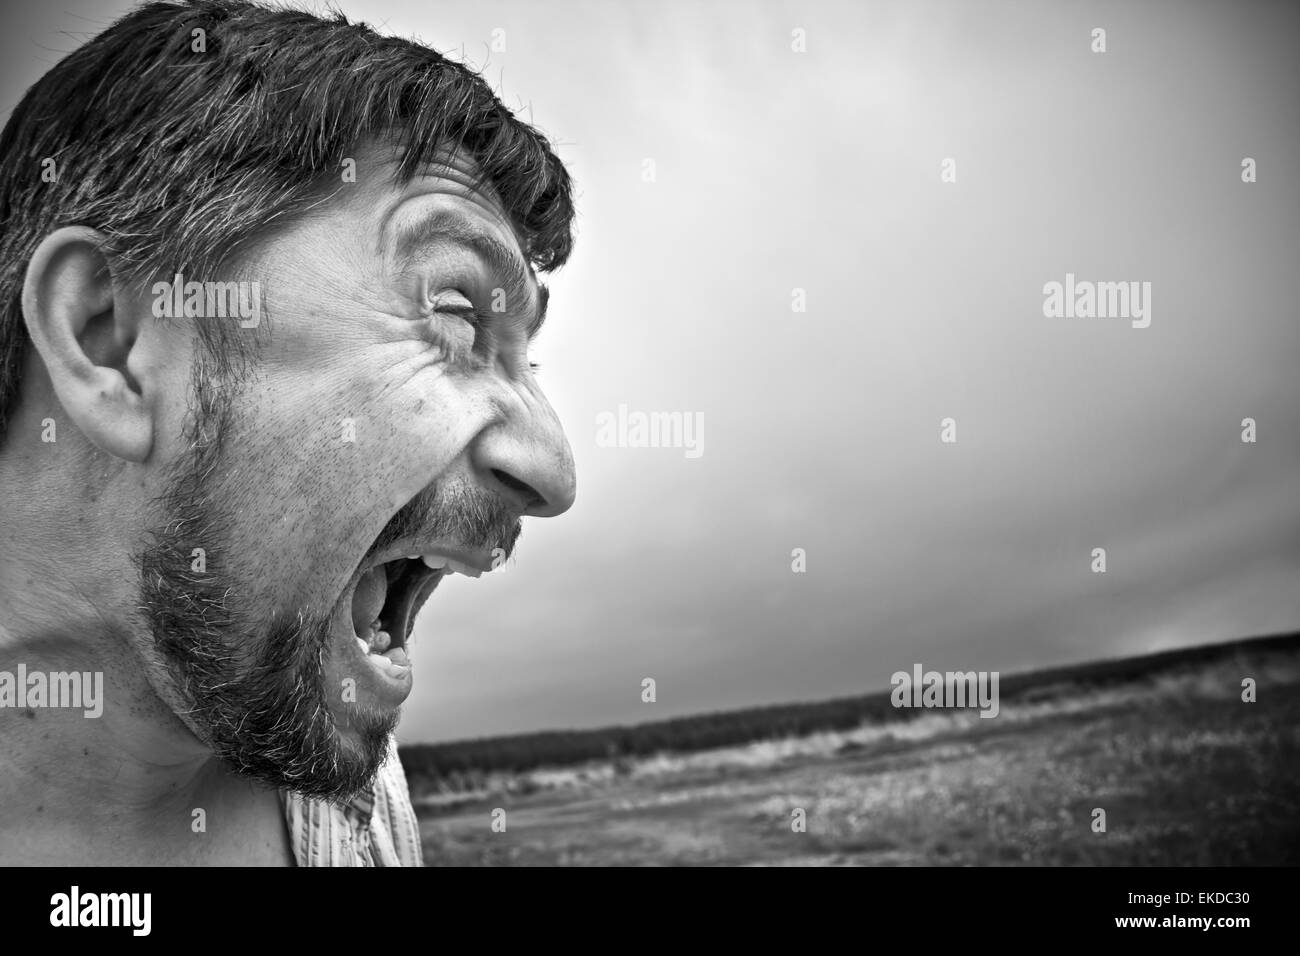 Scary screaming face Stock Photo - Alamy